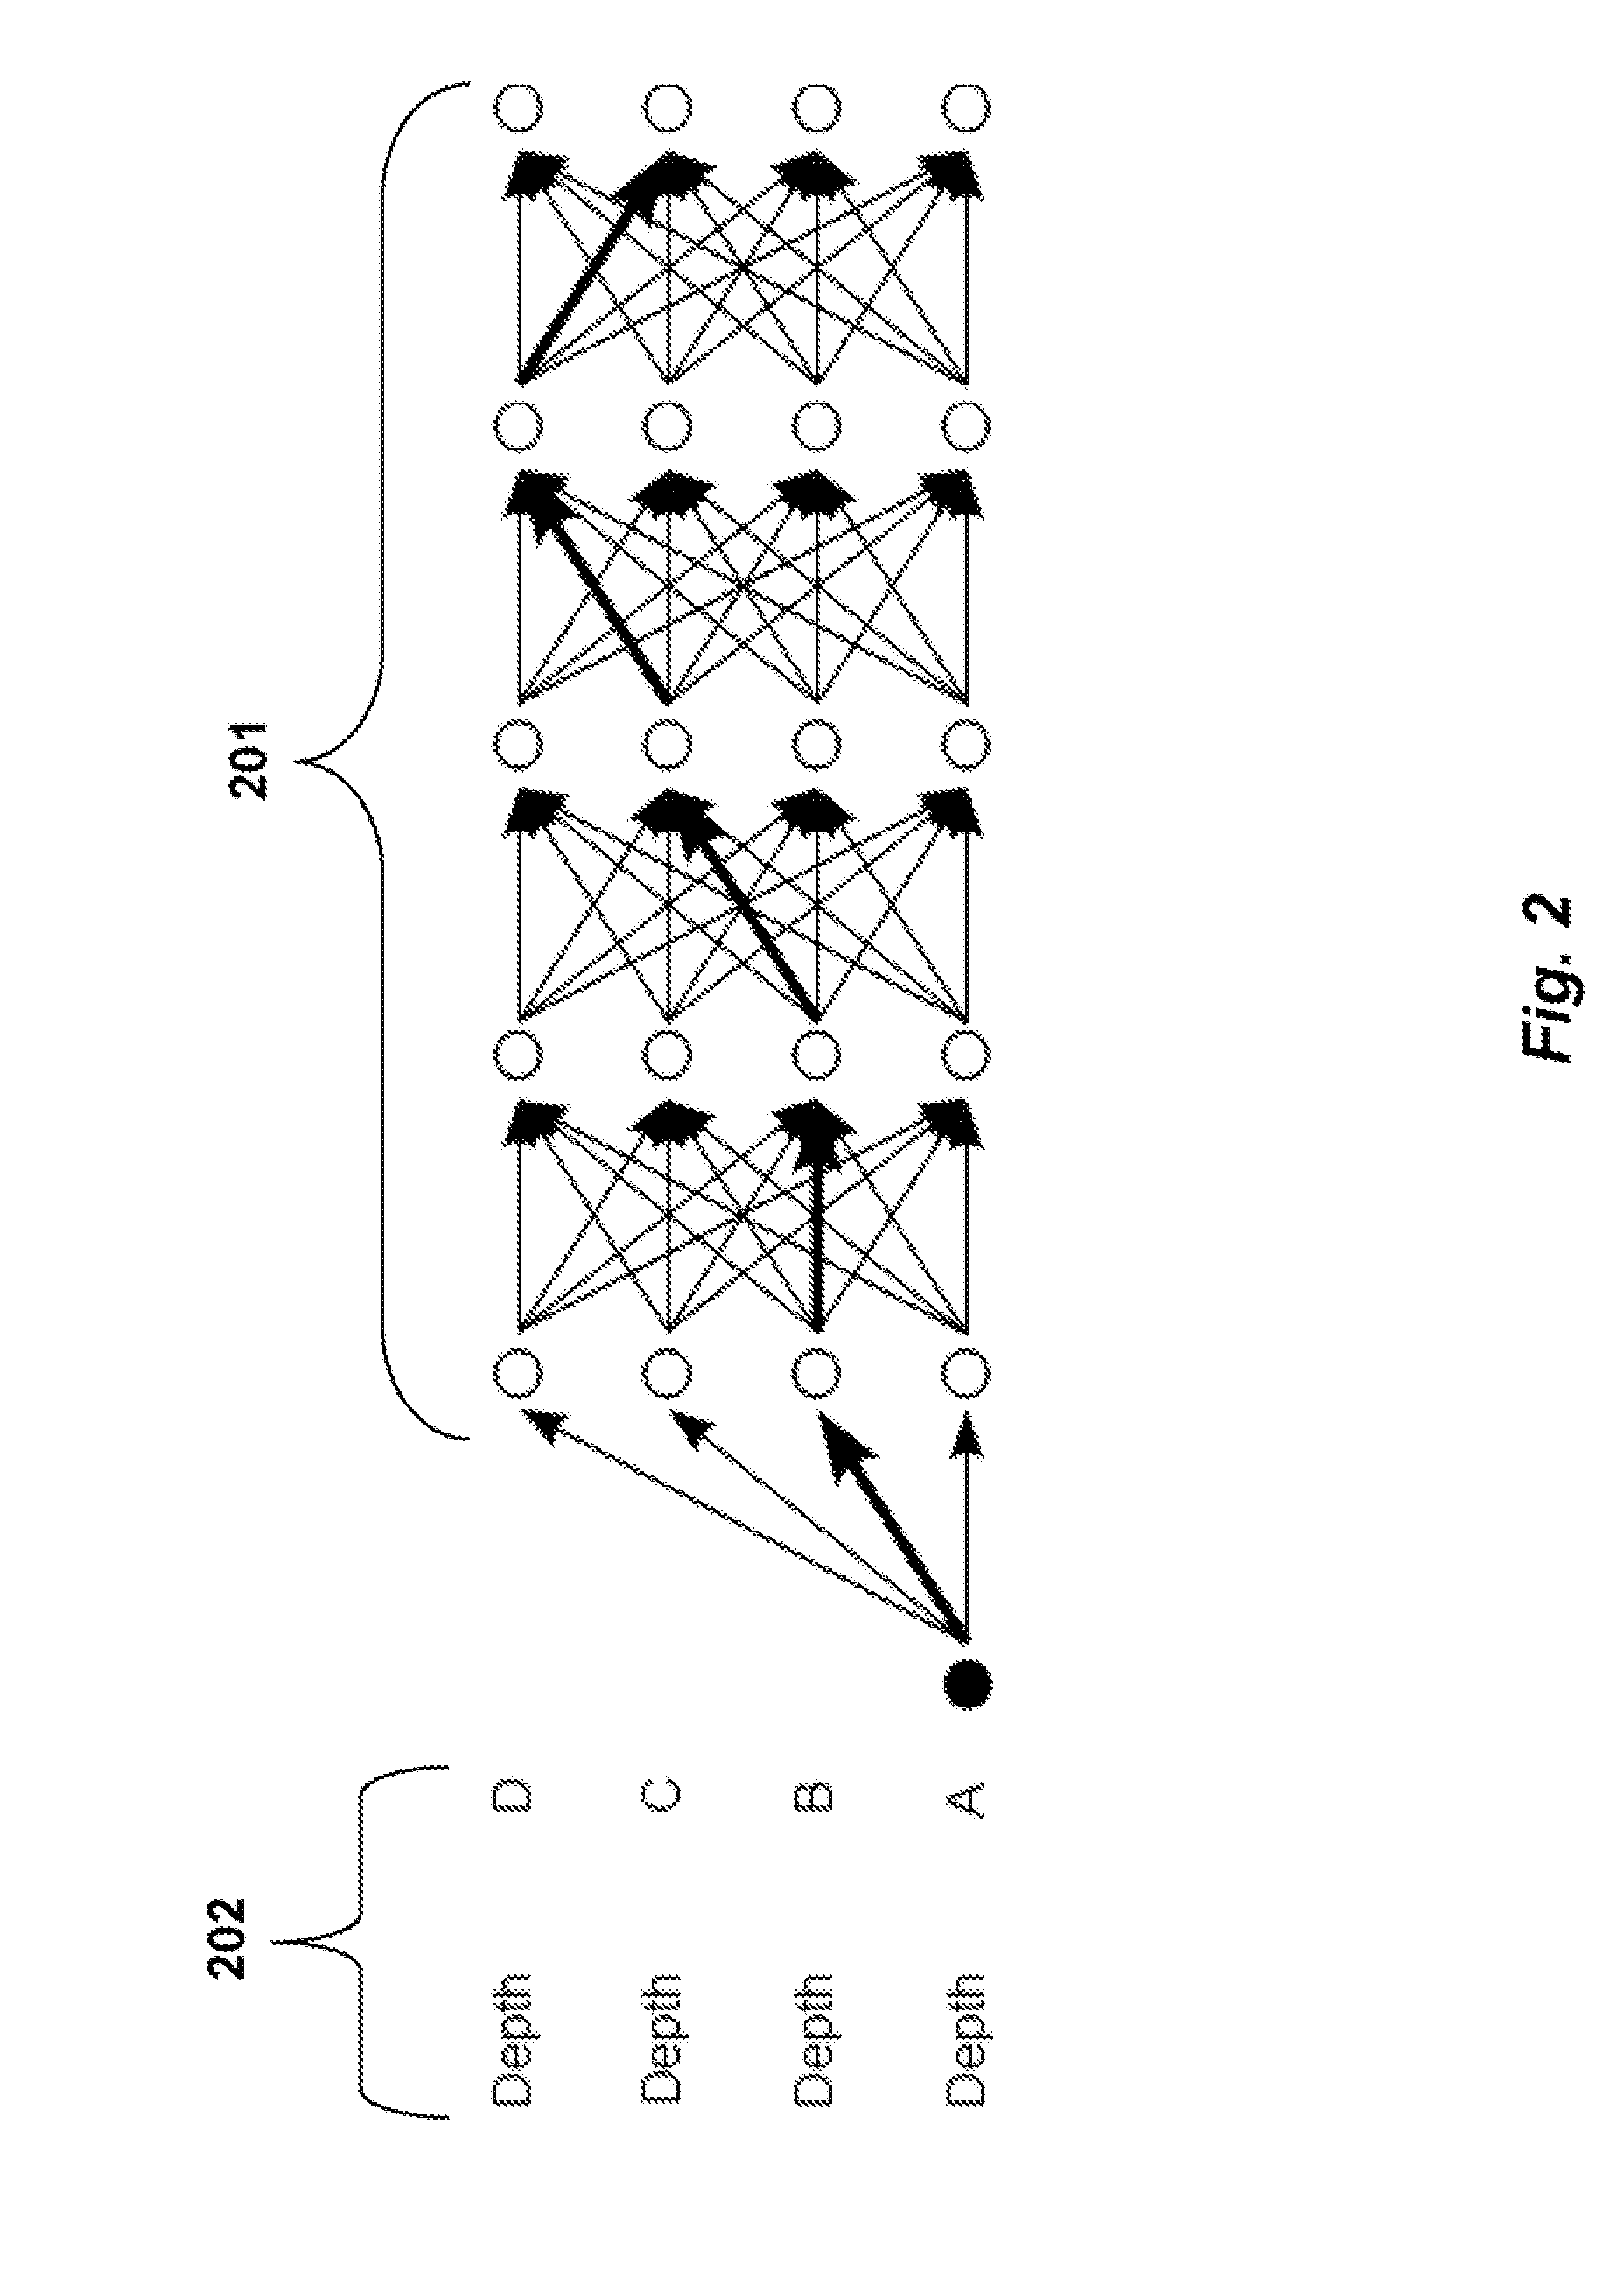 Method for Enhancing Depth Images of Scenes Using Trellis Structures